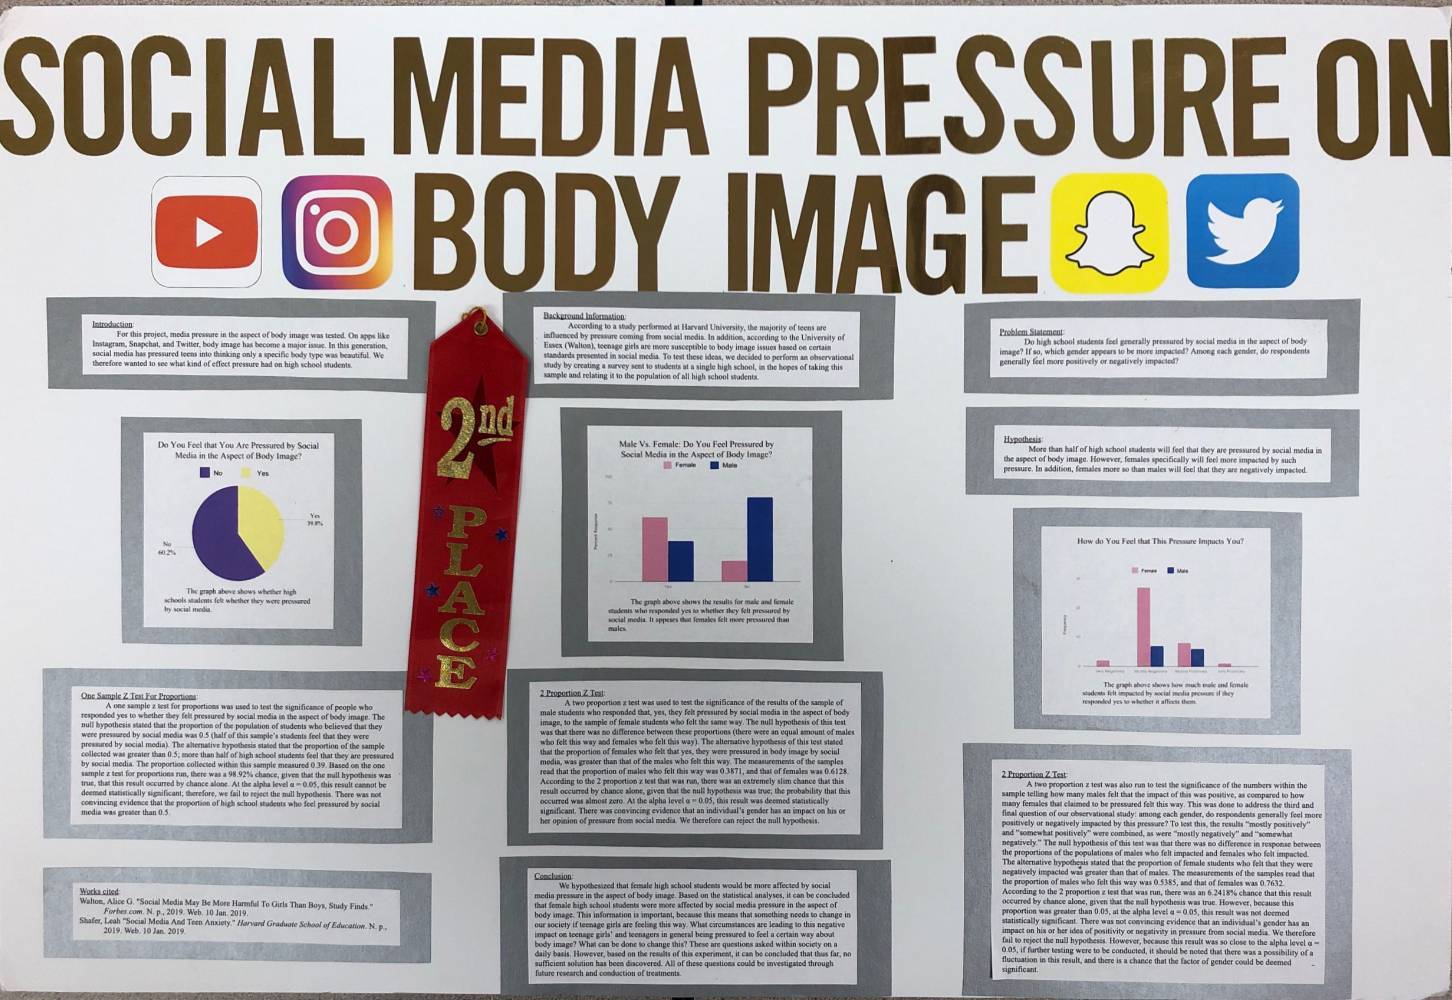 Example Poster: "Social Media Pressure on Body Image"